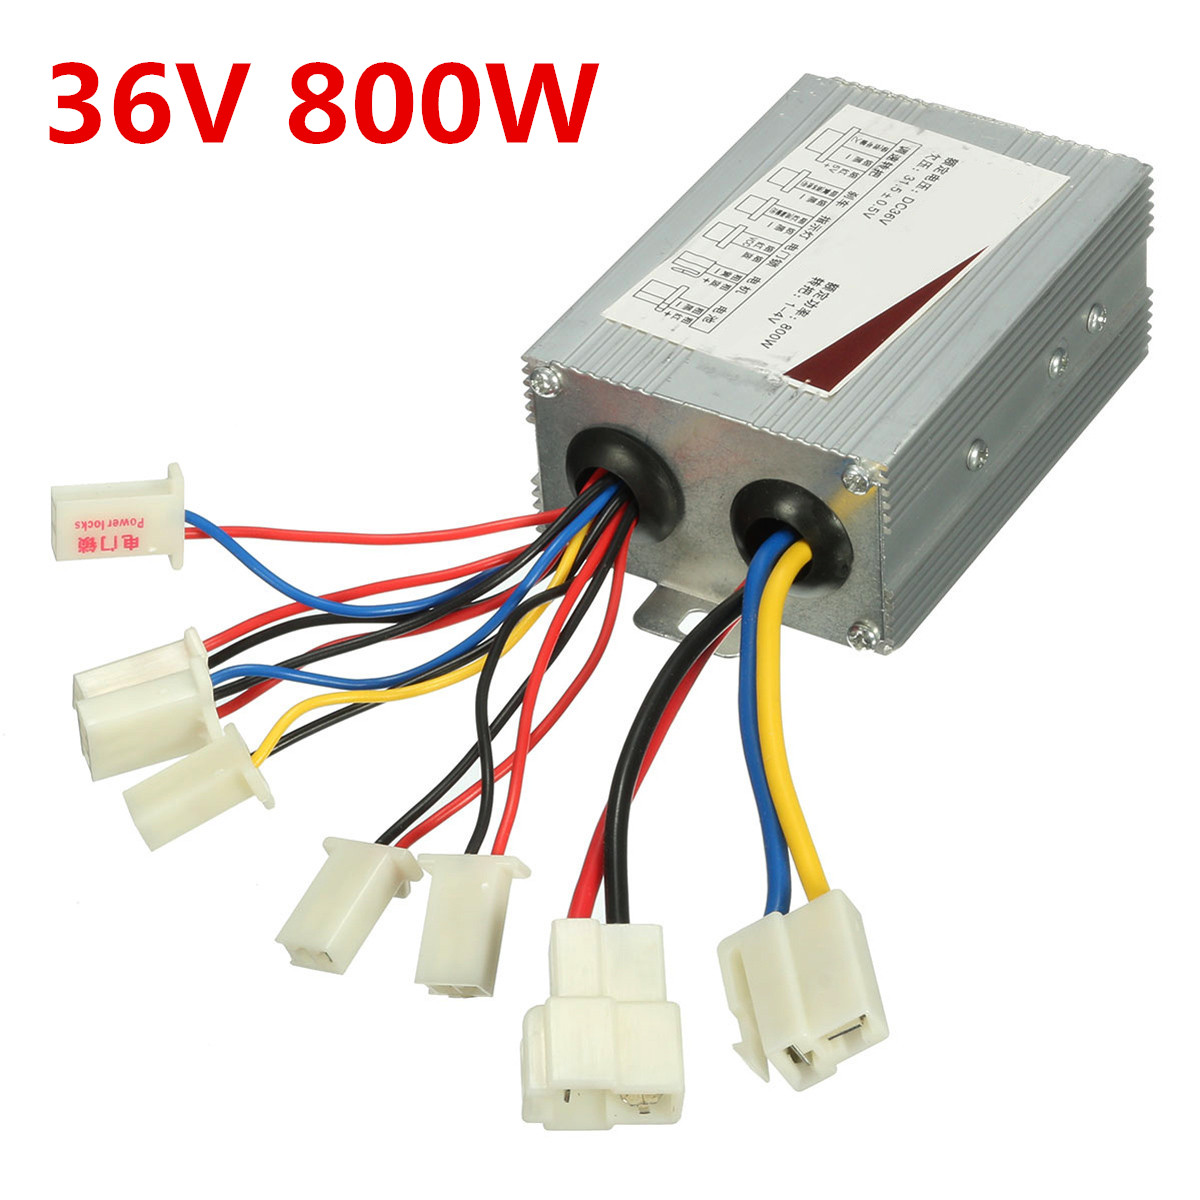 36V 800W DC Brush Motor Speed Controller for Electric Scooter Bicycle E-bike Motorcycle Accessories Parts